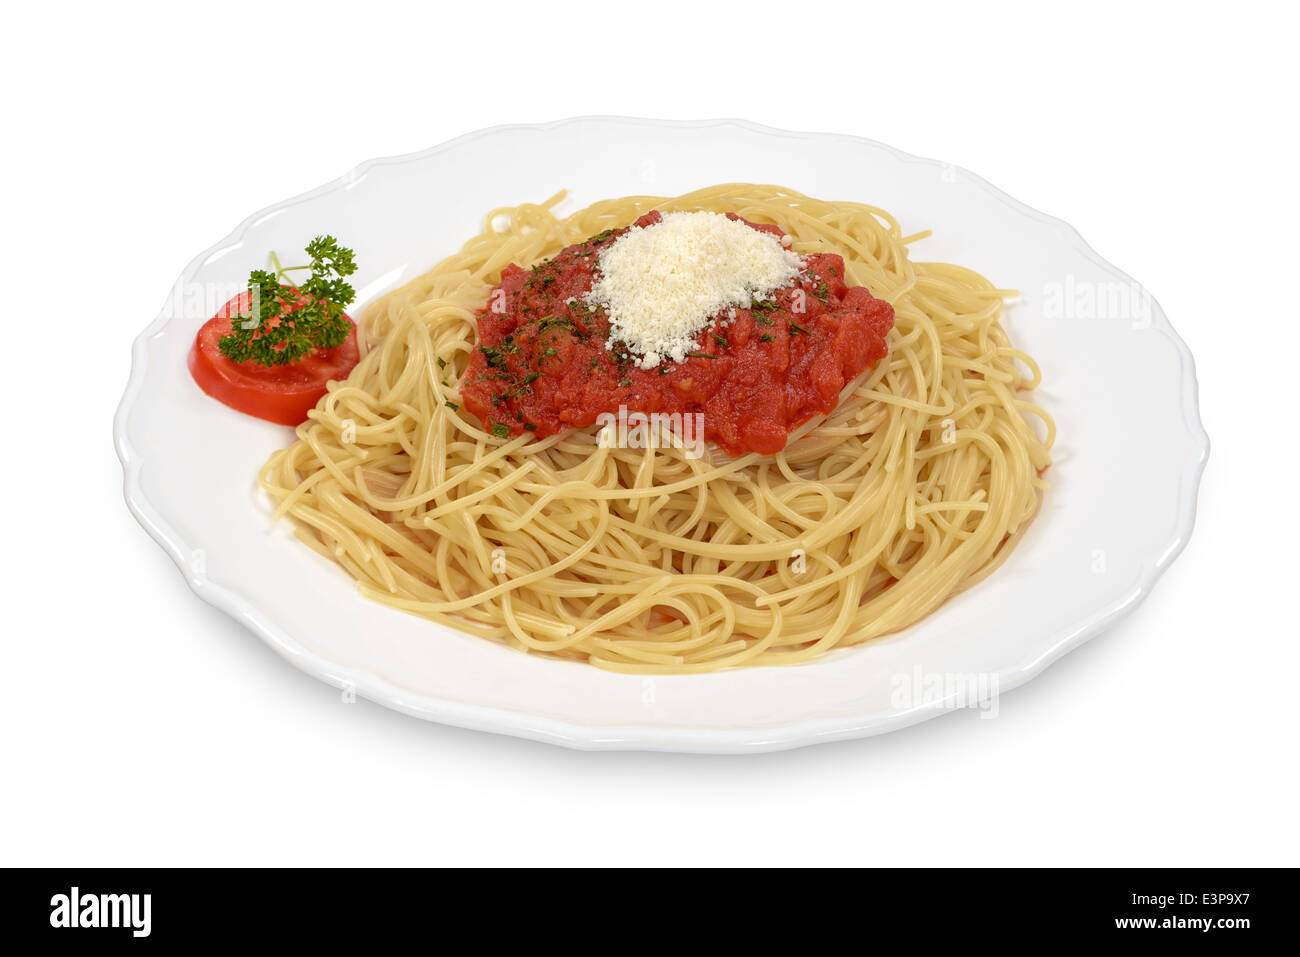 Spaghetti meal dish plate with tomato sauce and cheese Stock Photo